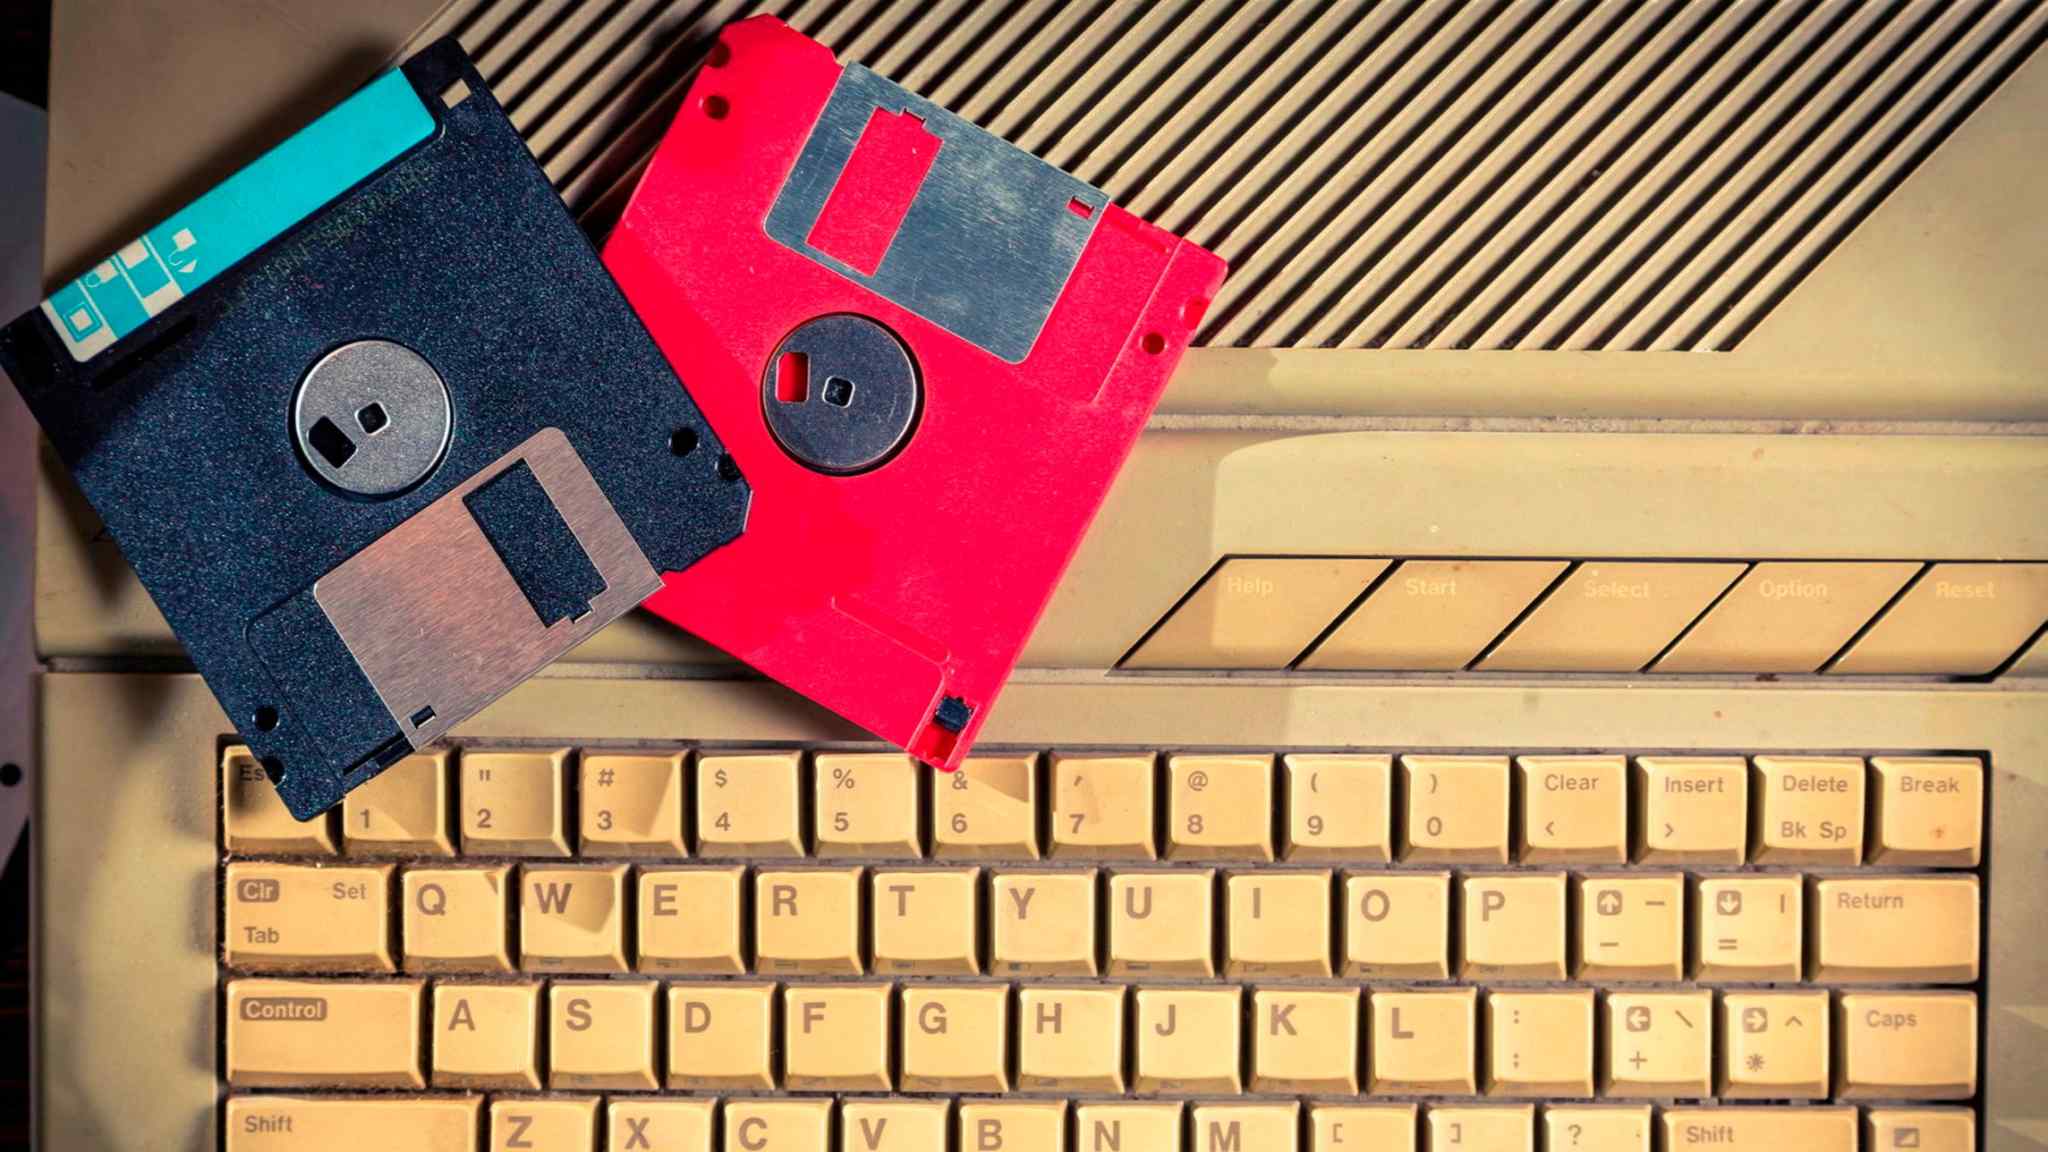 GIC/Works Human: Japan’s reliance on floppy disks creates a need for cloud cover